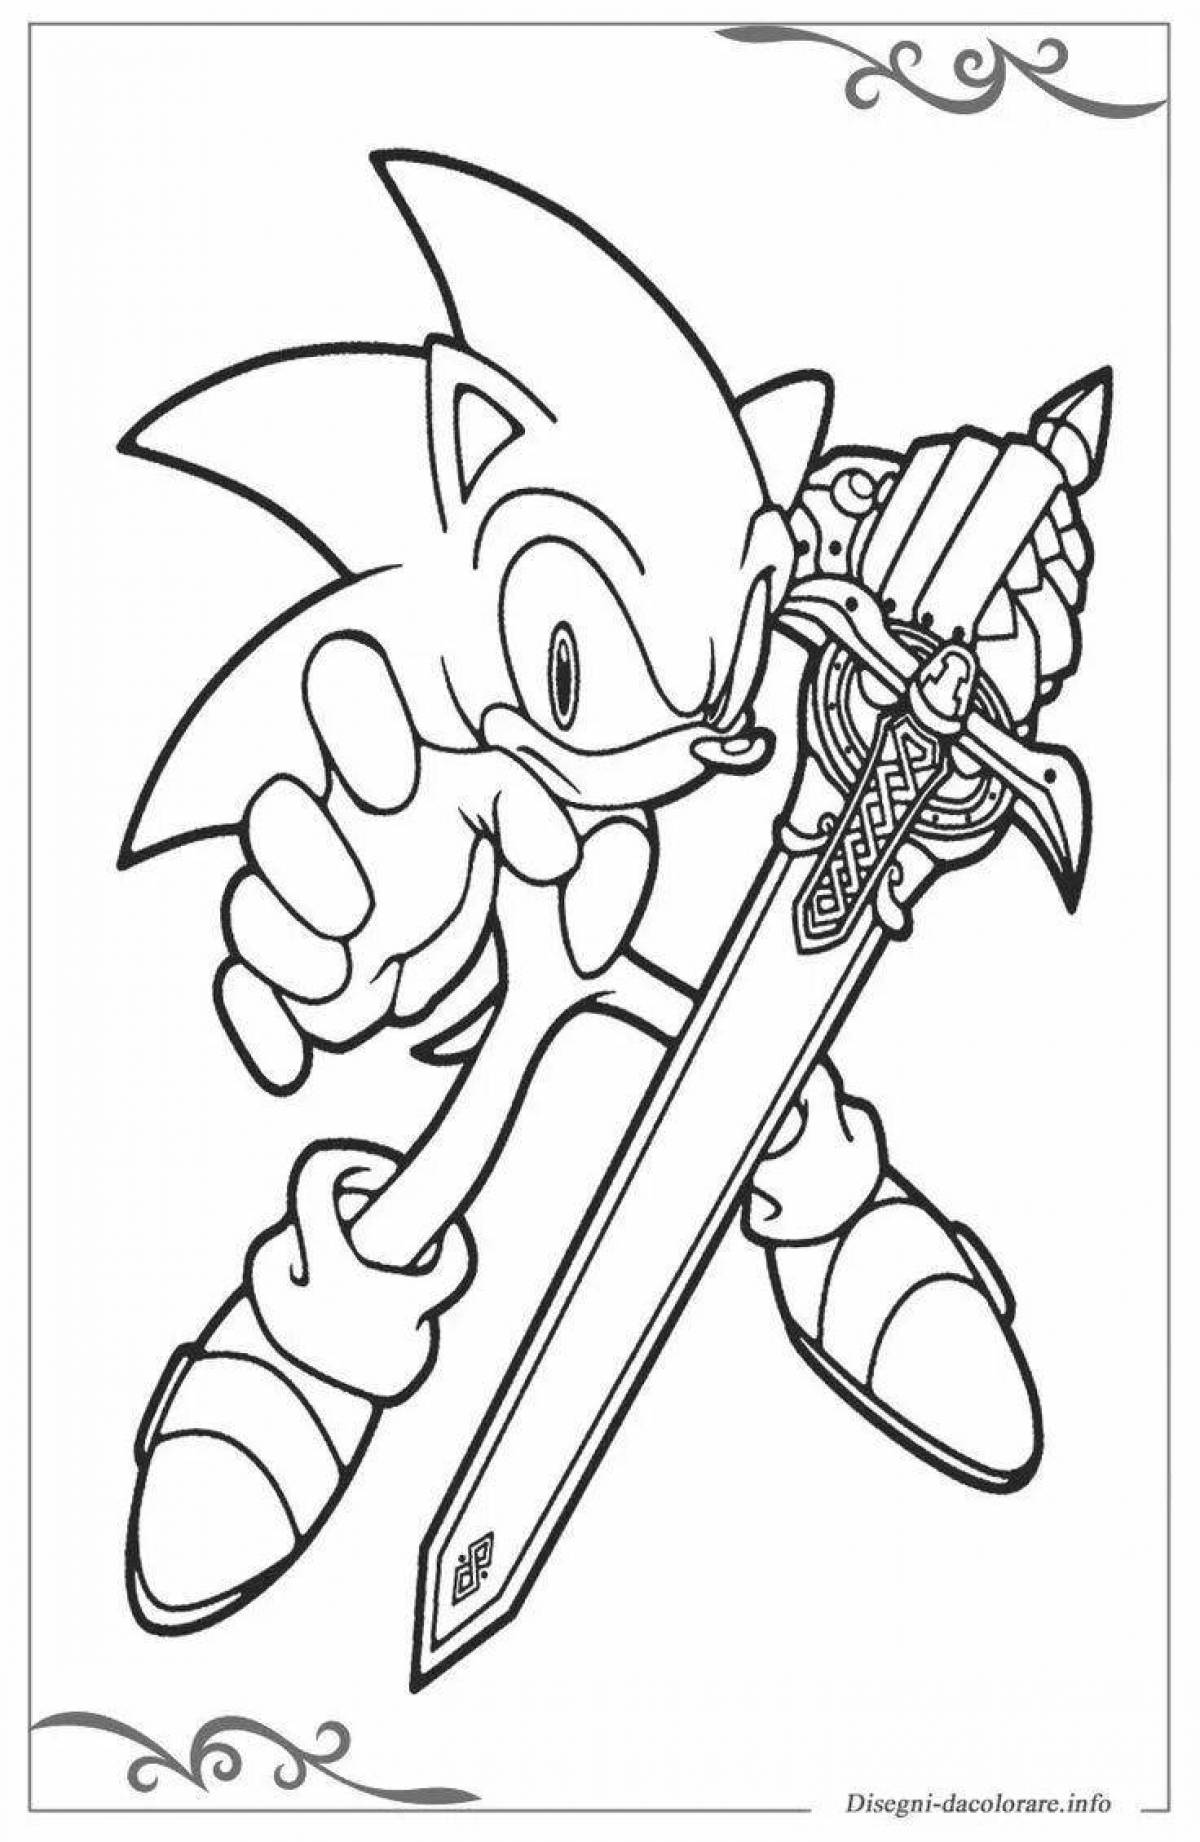 Sonic prime glowing coloring book